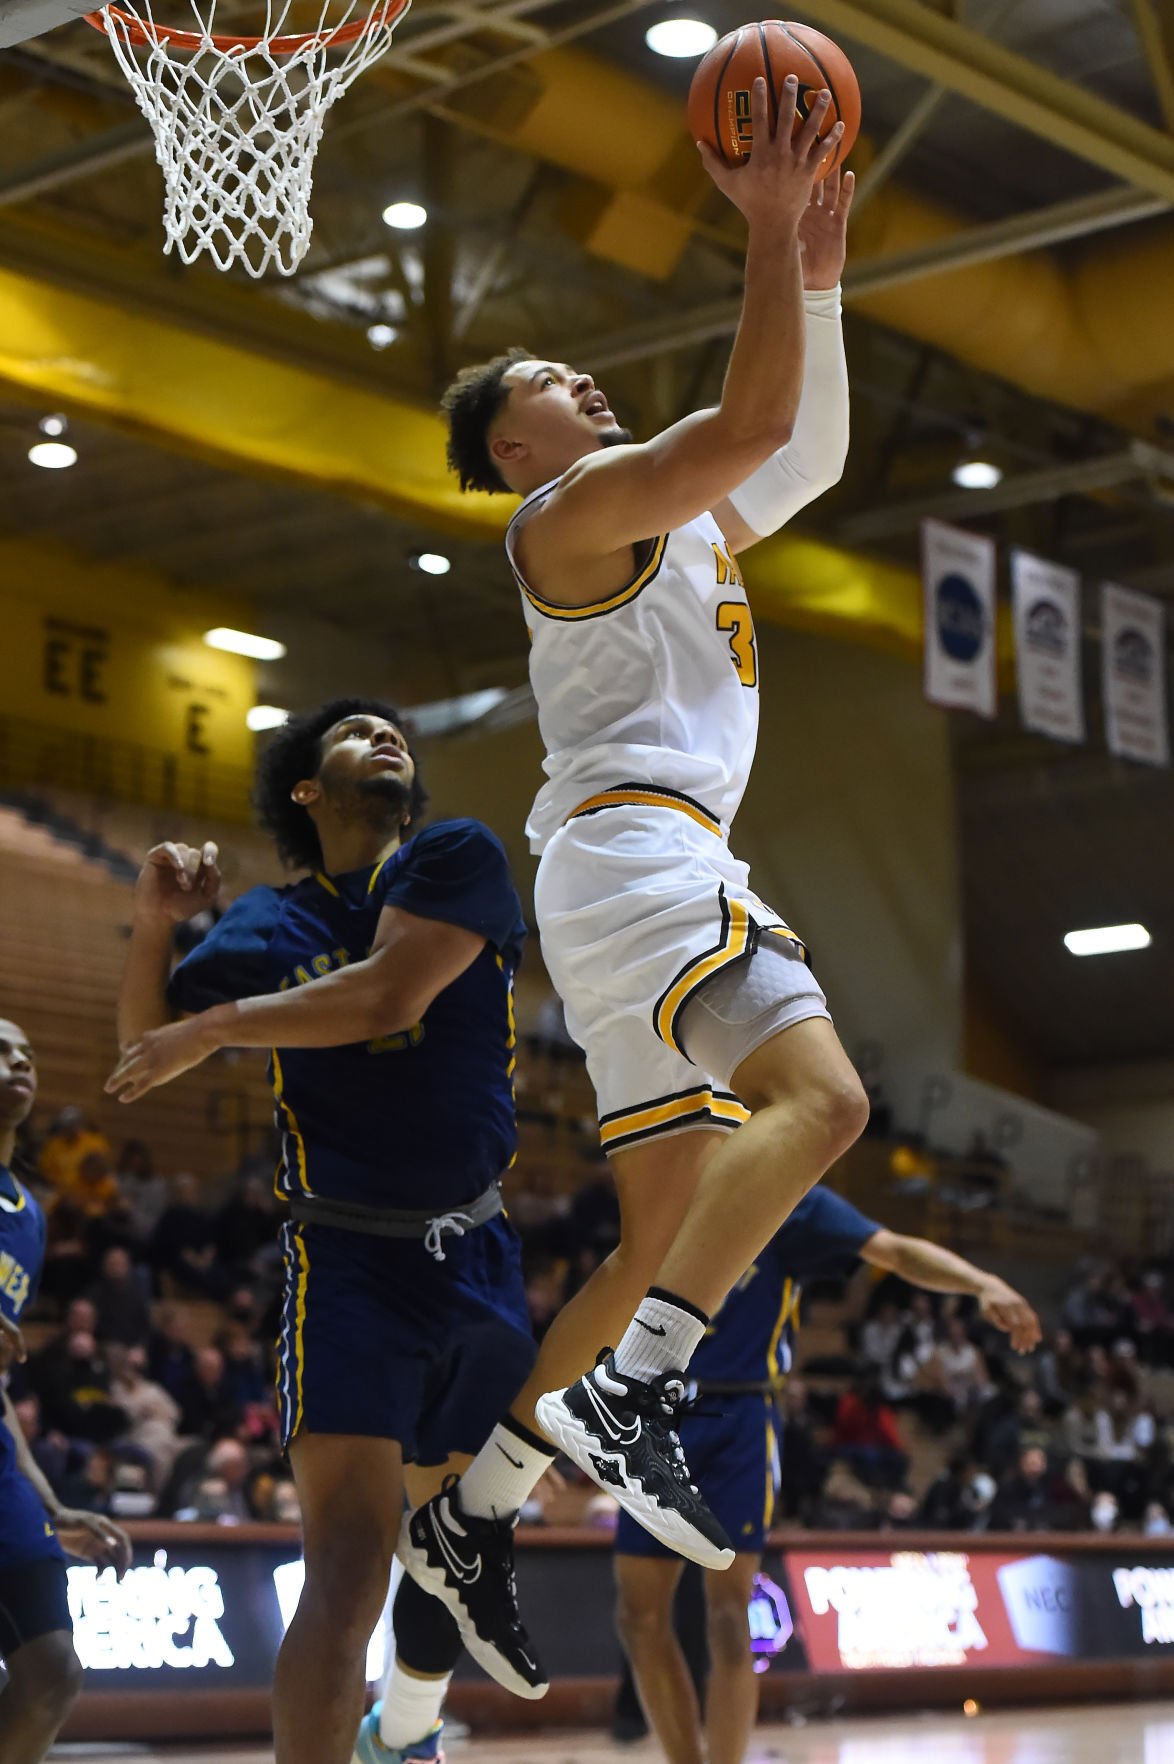 Kobe King shows no rust in Valparaiso debut after time away from  basketball, suspension | Valparaiso University Athletics | nwitimes.com